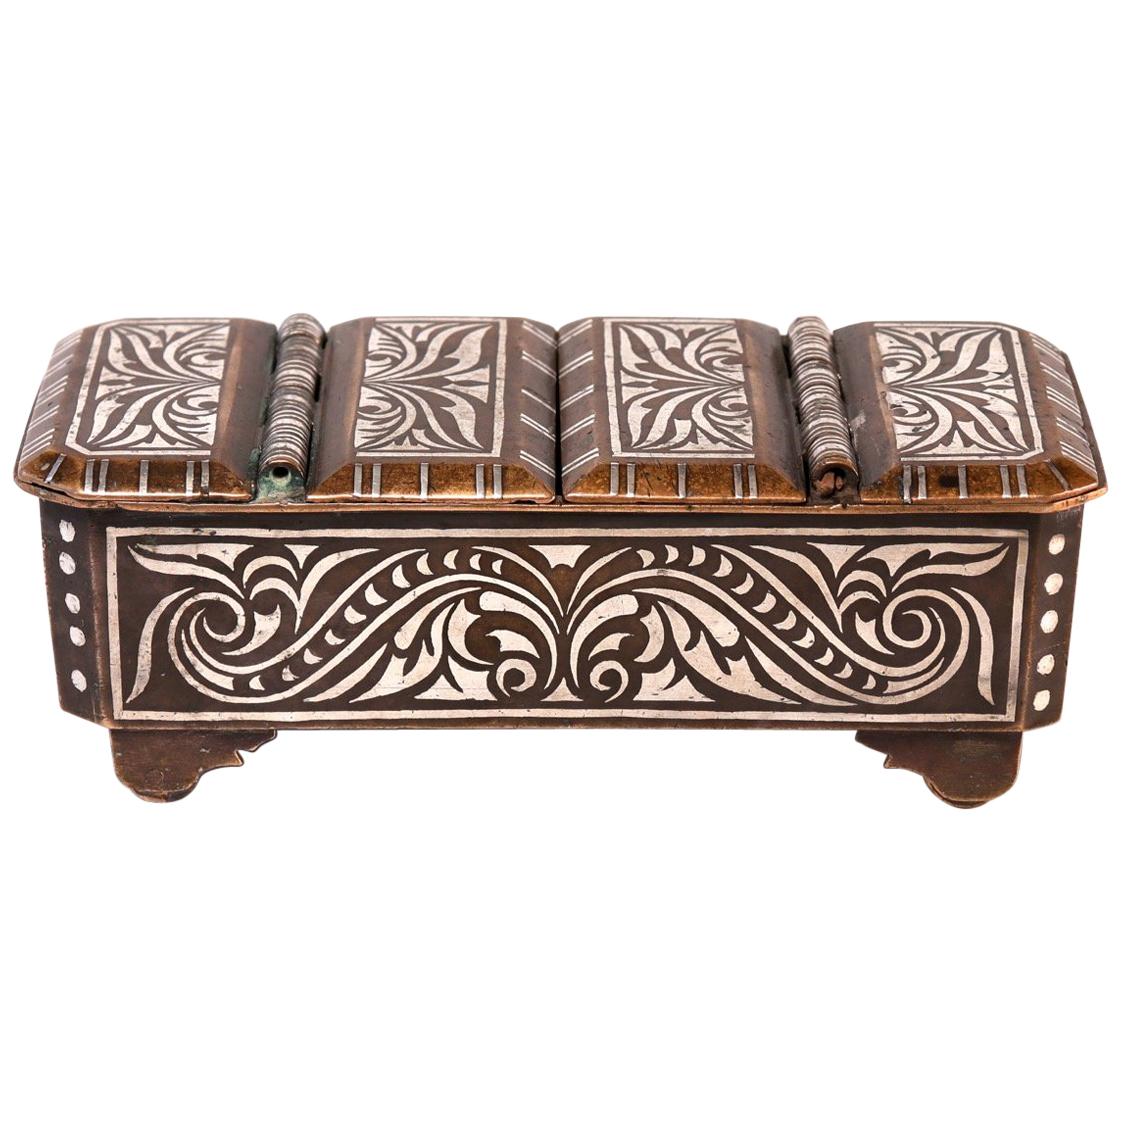 Southern Philippine 'Mindanao' Brass with Silver Inlay Betel Box